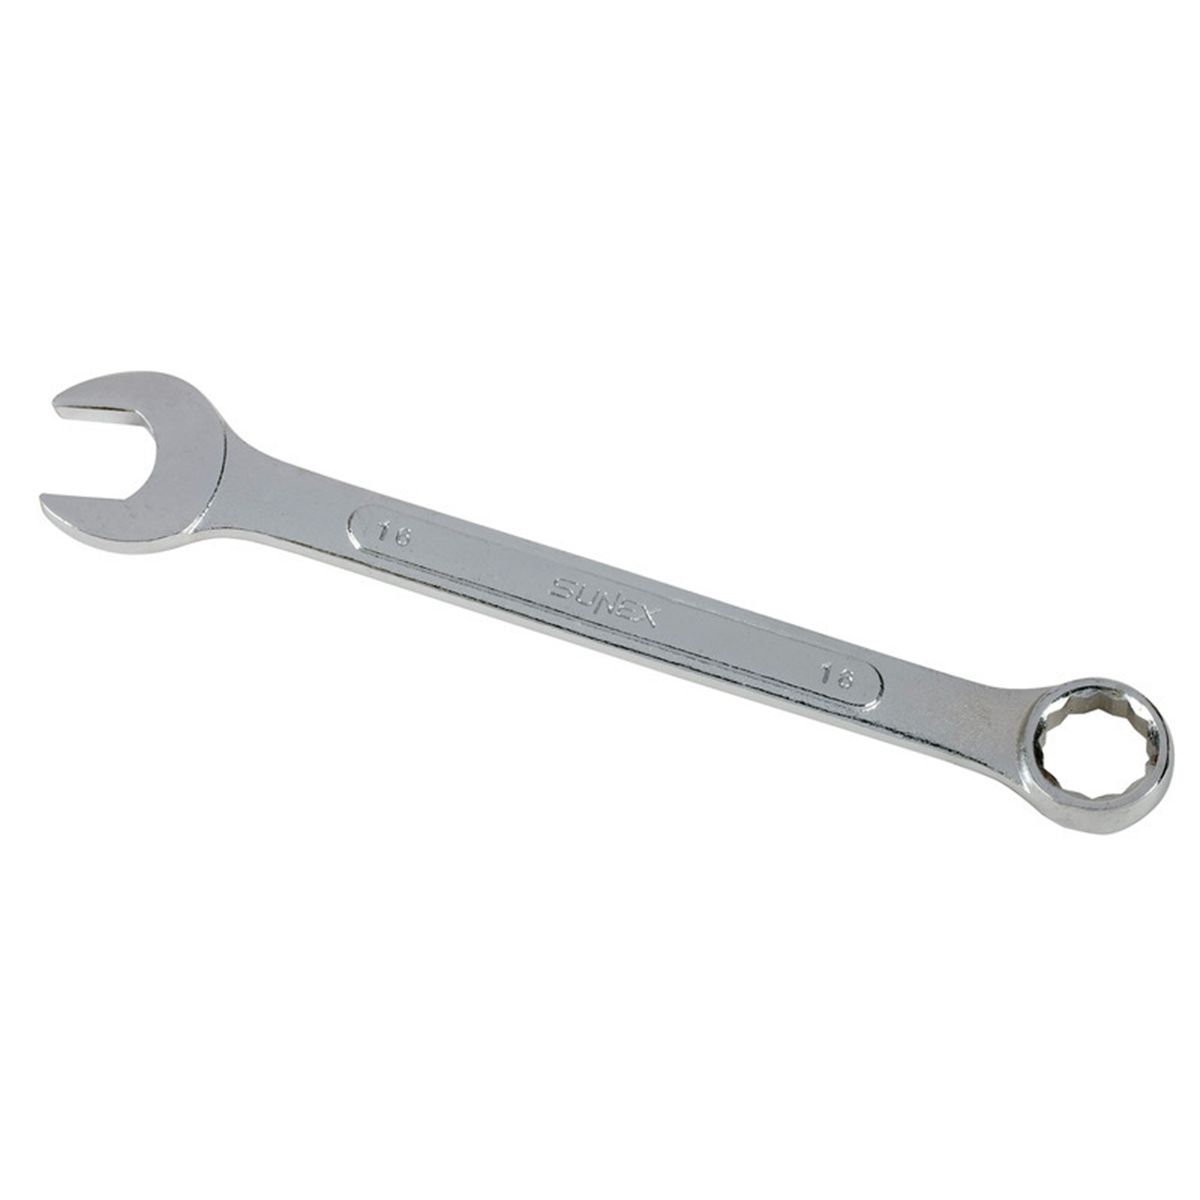 16mm Raised Panel Combination Wrench